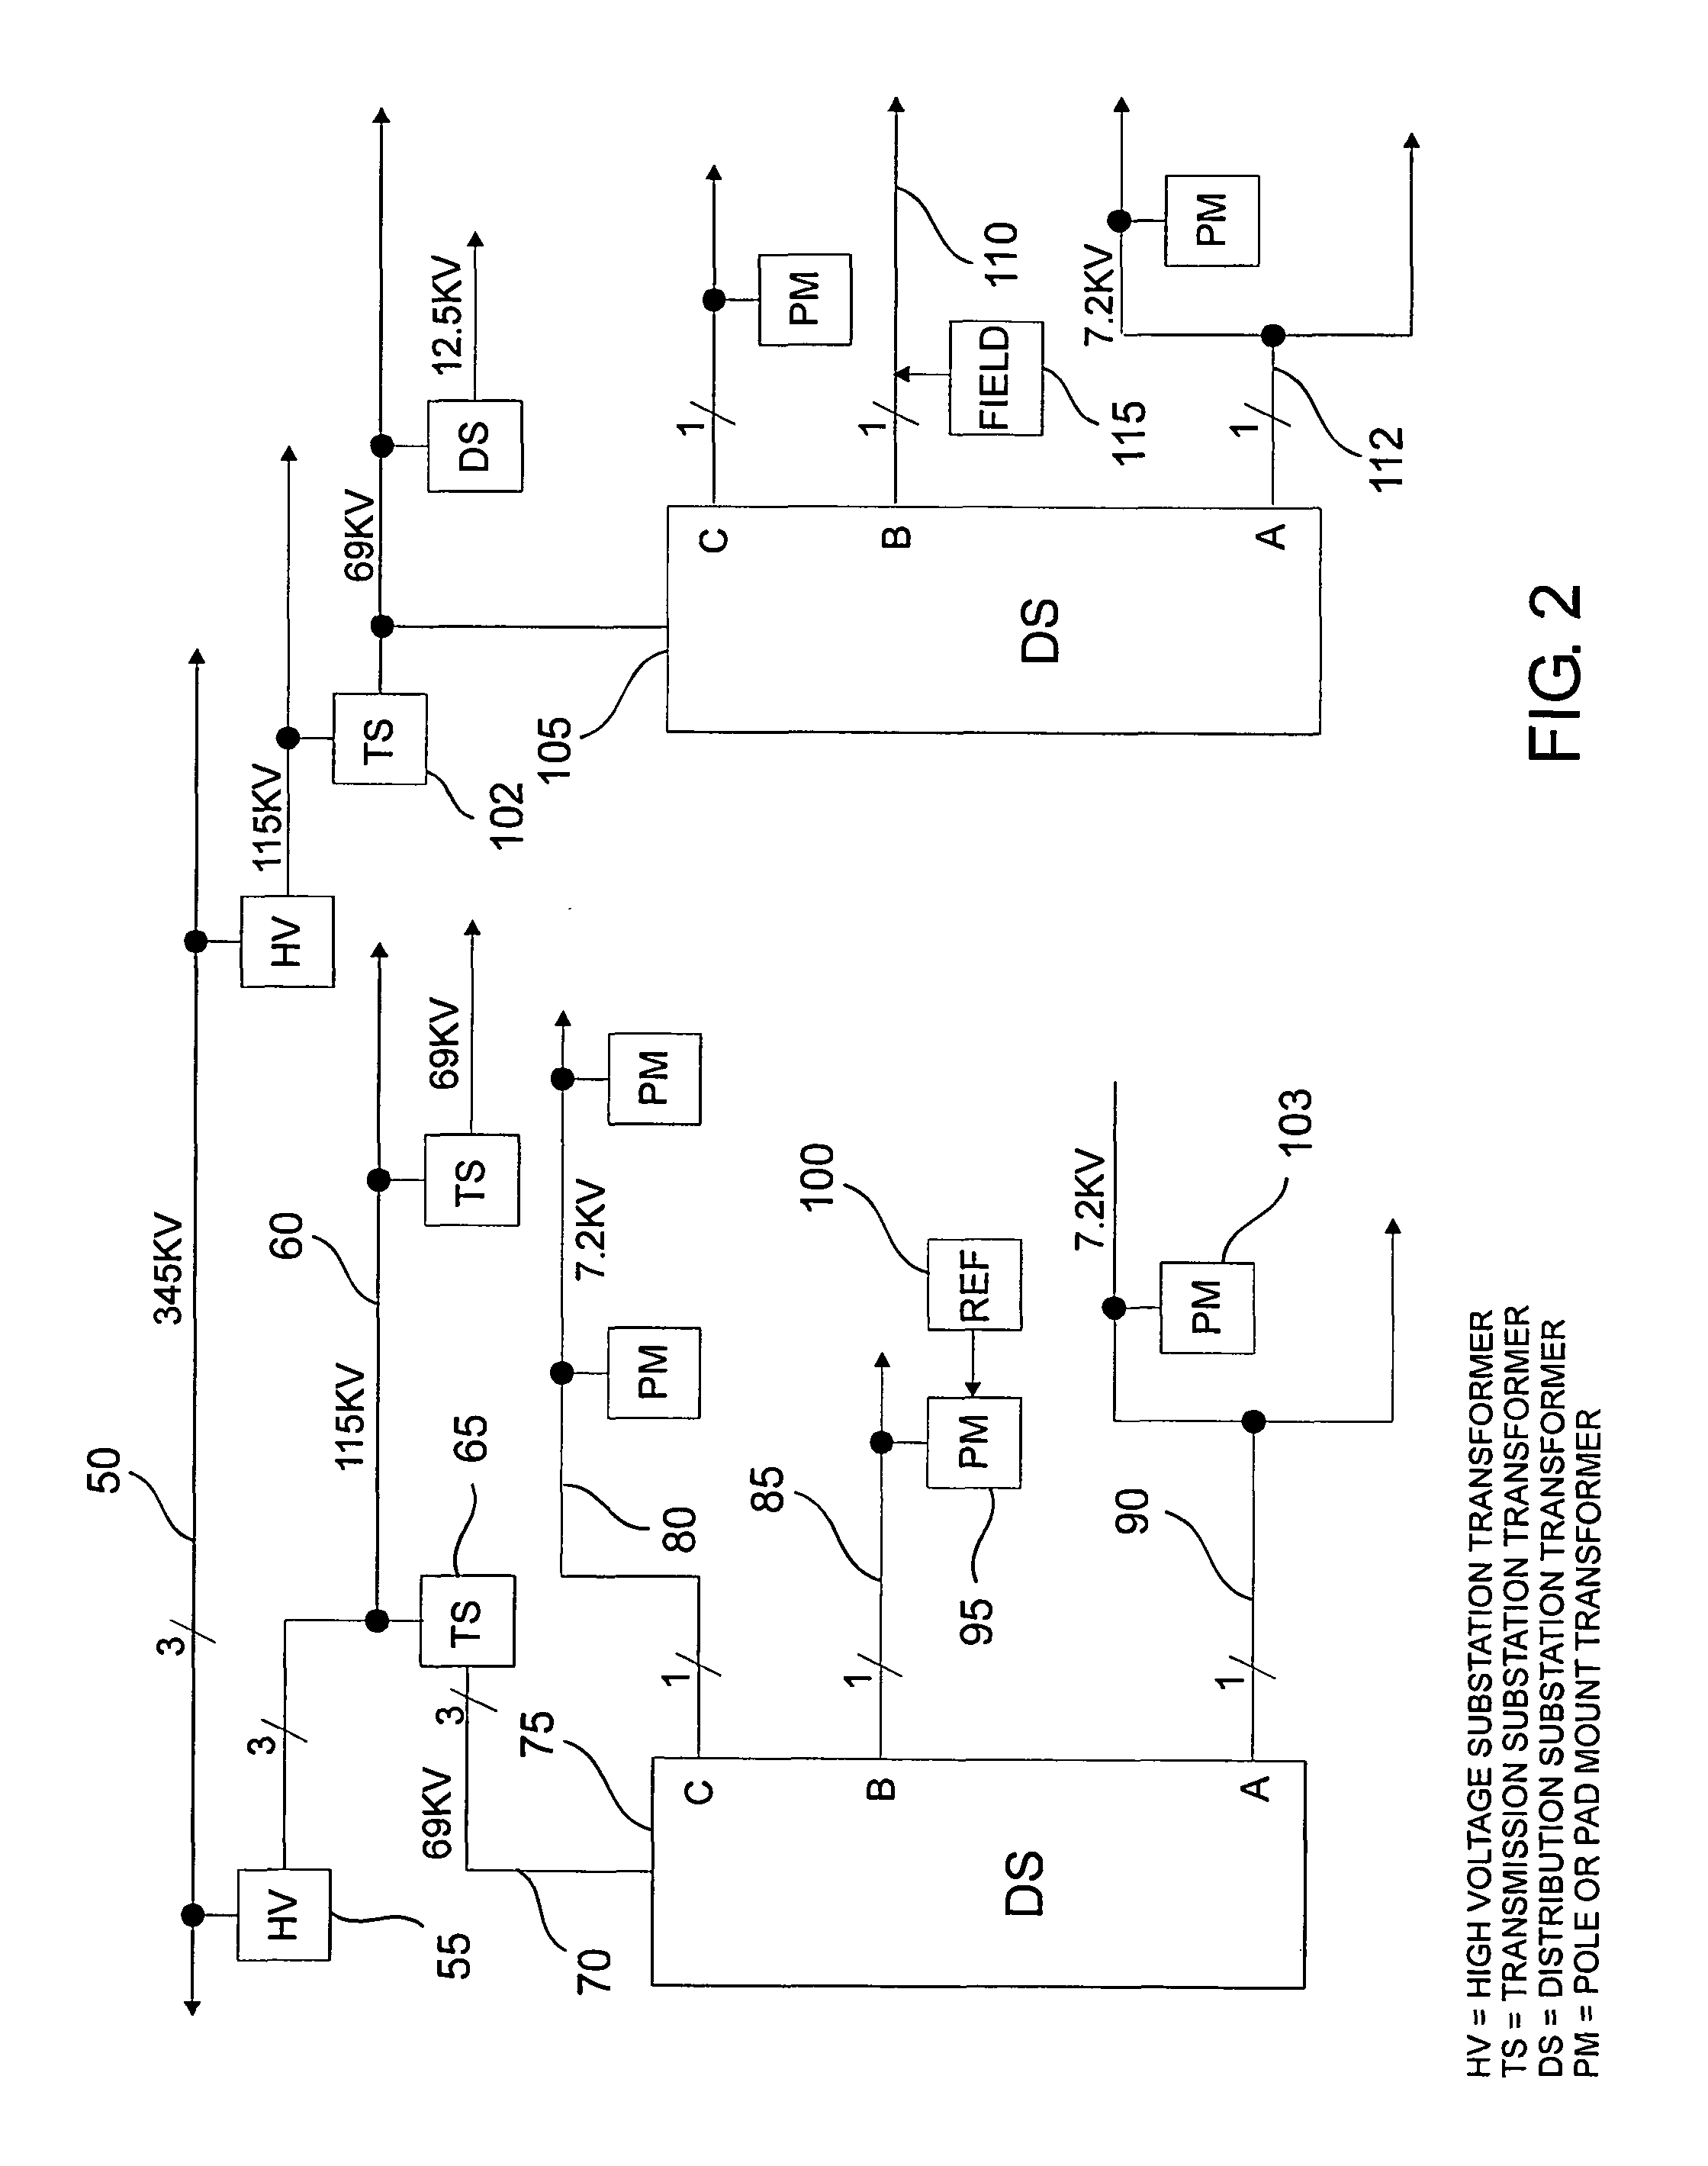 Method and apparatus for phase identification in a three-phase power distribution network